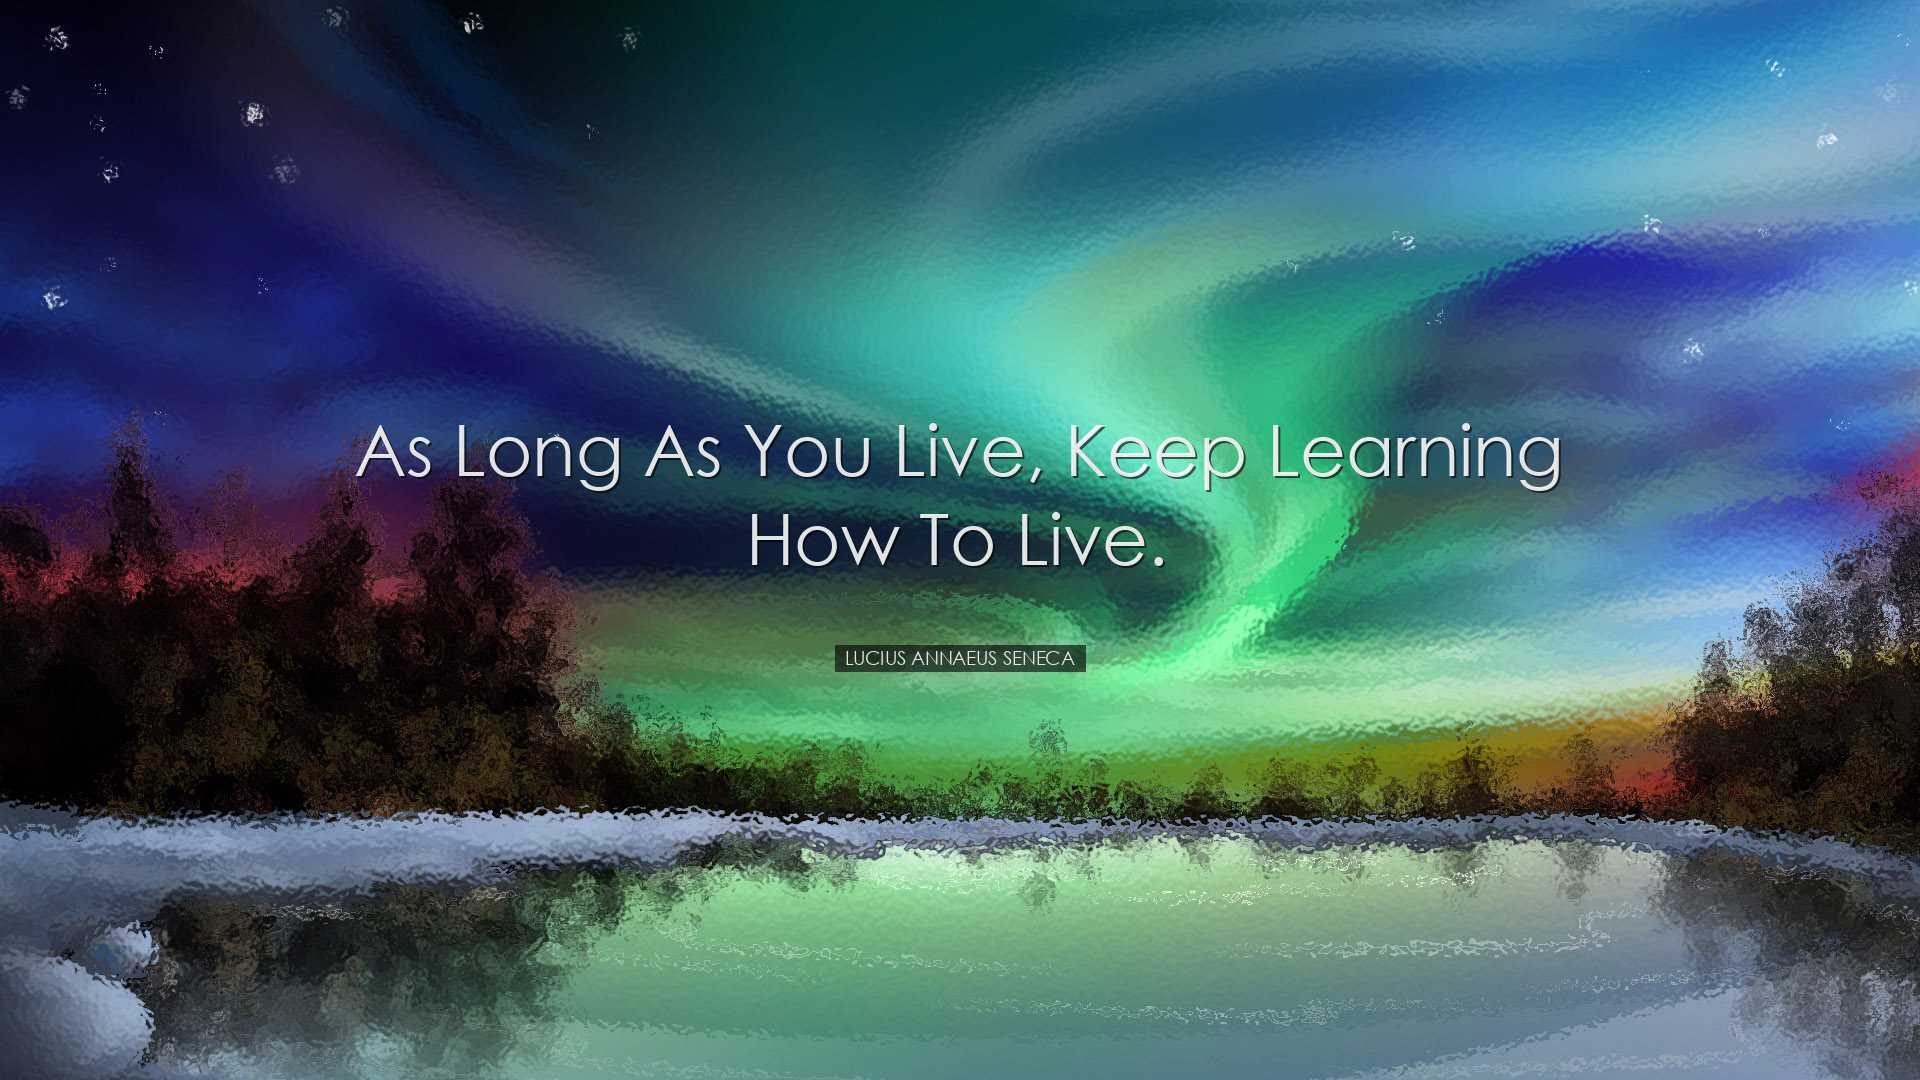 As long as you live, keep learning how to live. - Lucius Annaeus S